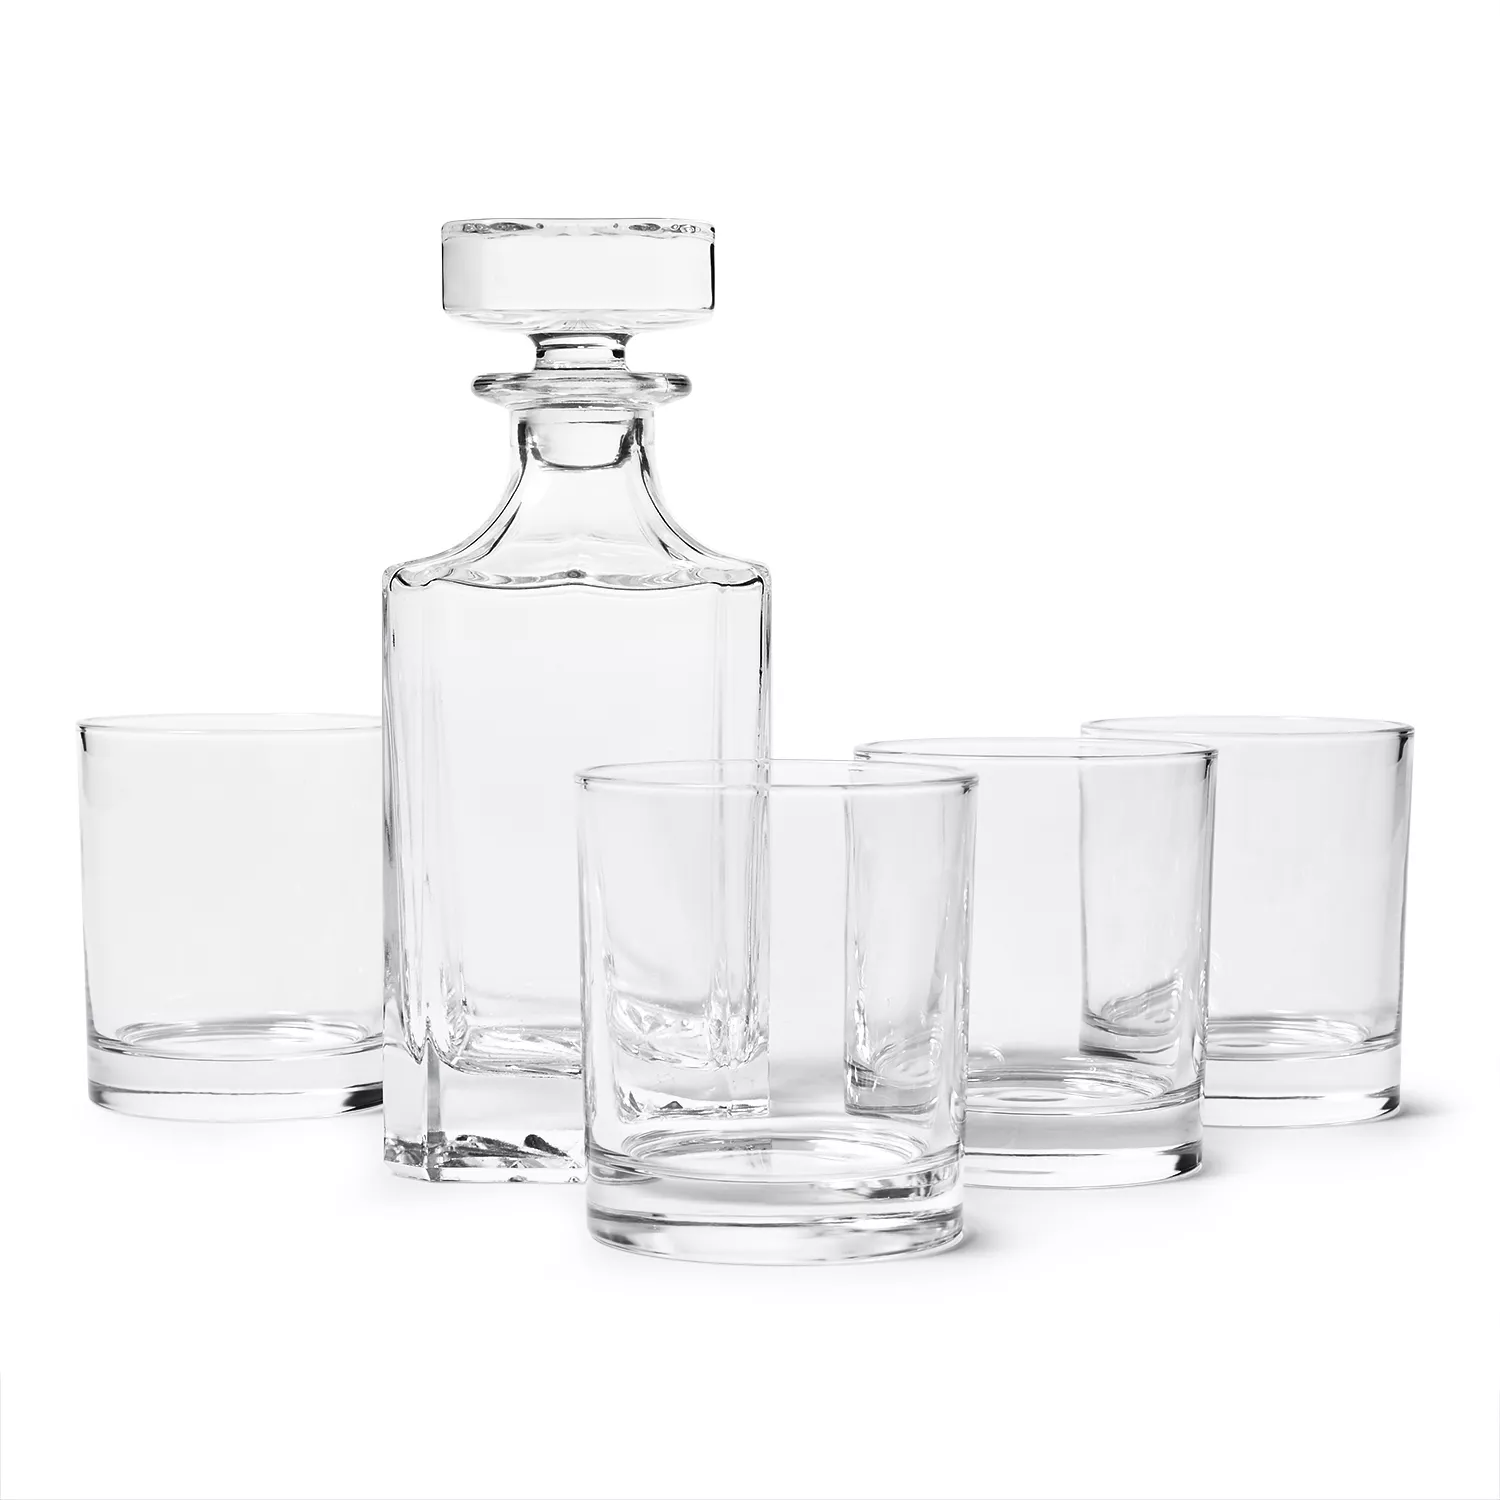 Dash of That Essentials 6 Piece Fluted Glass Bowls with Lids Set